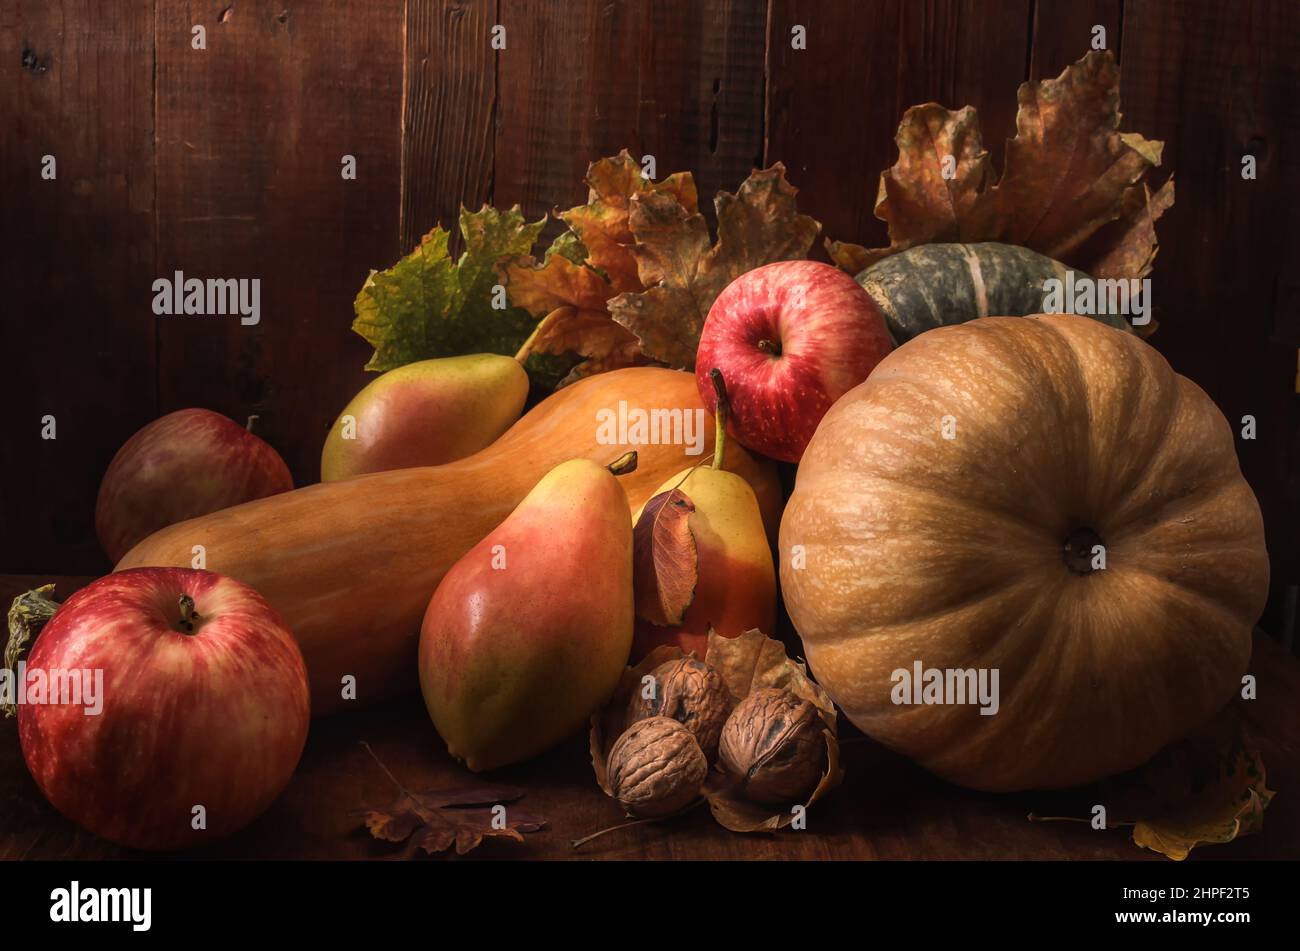 pumpkin and fruits in bulk on a dark wooden background in a rustic style Stock Photo